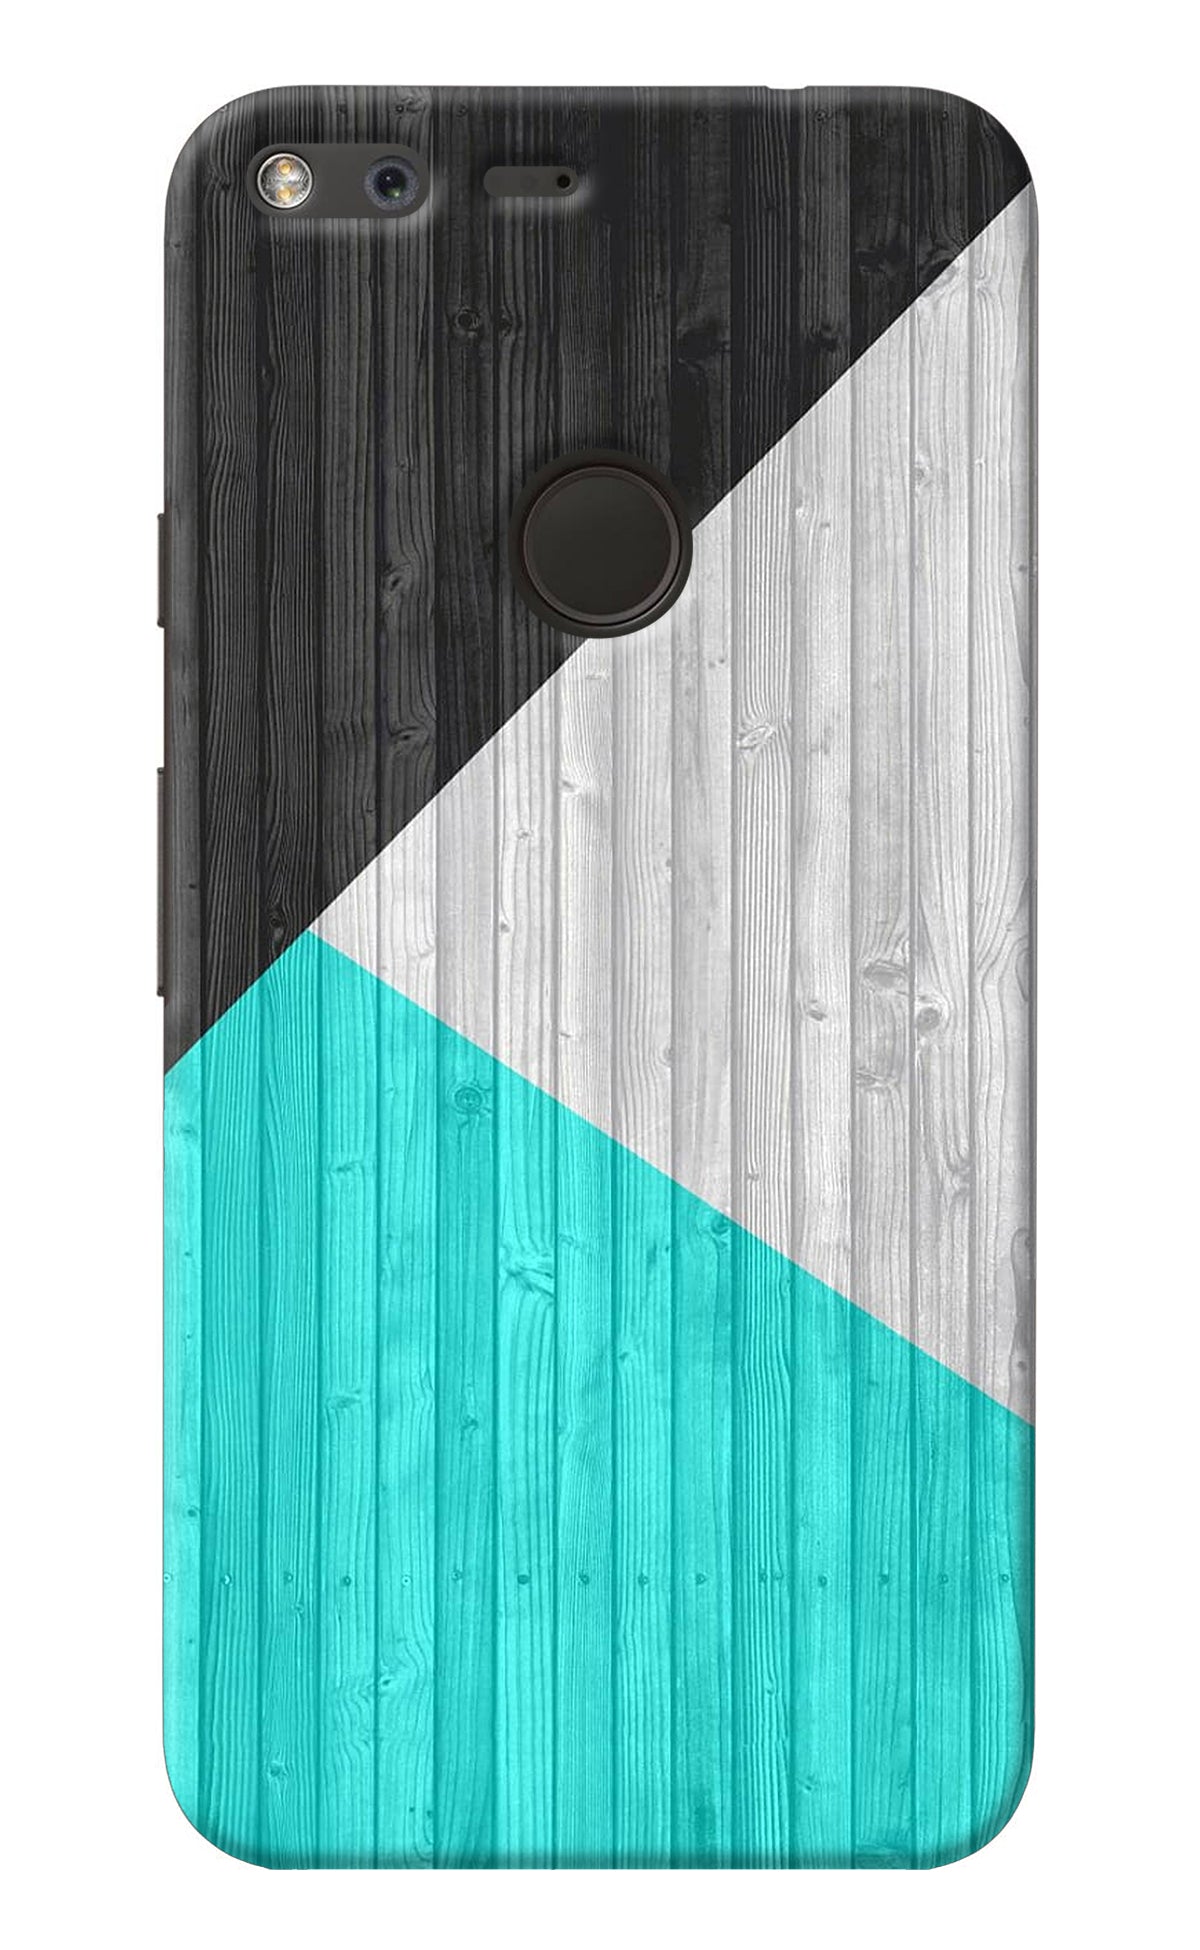 Wooden Abstract Google Pixel XL Back Cover